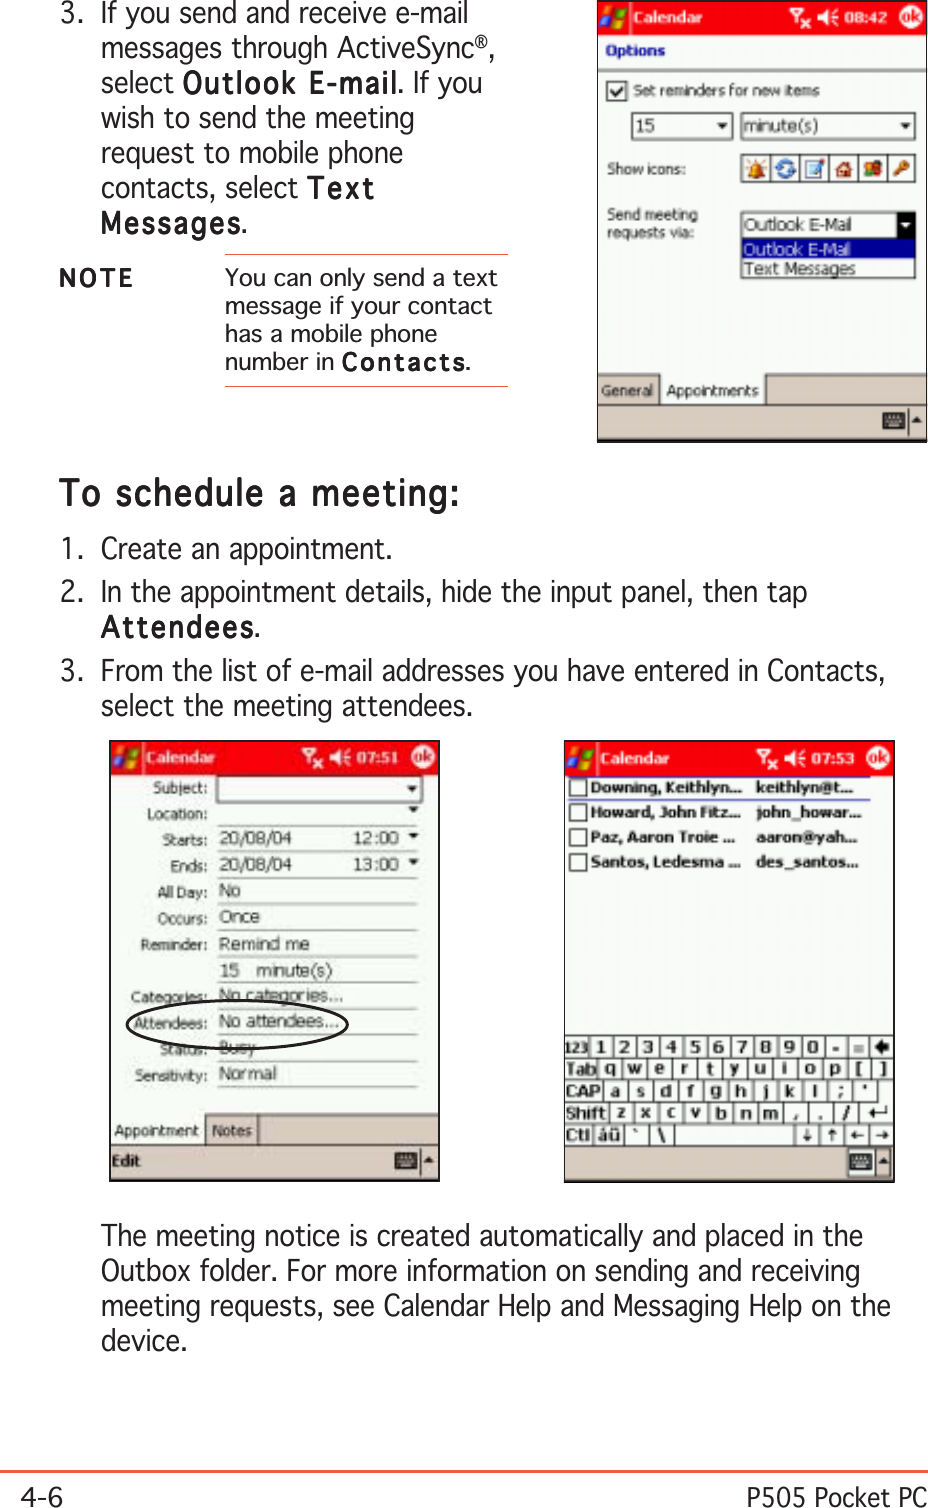 4-6P505 Pocket PCTo schedule a meeting:To schedule a meeting:To schedule a meeting:To schedule a meeting:To schedule a meeting:1. Create an appointment.2. In the appointment details, hide the input panel, then tapAttendeesAttendeesAttendeesAttendeesAttendees.3. From the list of e-mail addresses you have entered in Contacts,select the meeting attendees.3. If you send and receive e-mailmessages through ActiveSync®,select Outlook E-mailOutlook E-mailOutlook E-mailOutlook E-mailOutlook E-mail. If youwish to send the meetingrequest to mobile phonecontacts, select TextTextTextTextTextMessagesMessagesMessagesMessagesMessages.NOTENOTENOTENOTEN O T E You can only send a textmessage if your contacthas a mobile phonenumber in ContactsContactsContactsContactsContacts.The meeting notice is created automatically and placed in theOutbox folder. For more information on sending and receivingmeeting requests, see Calendar Help and Messaging Help on thedevice.